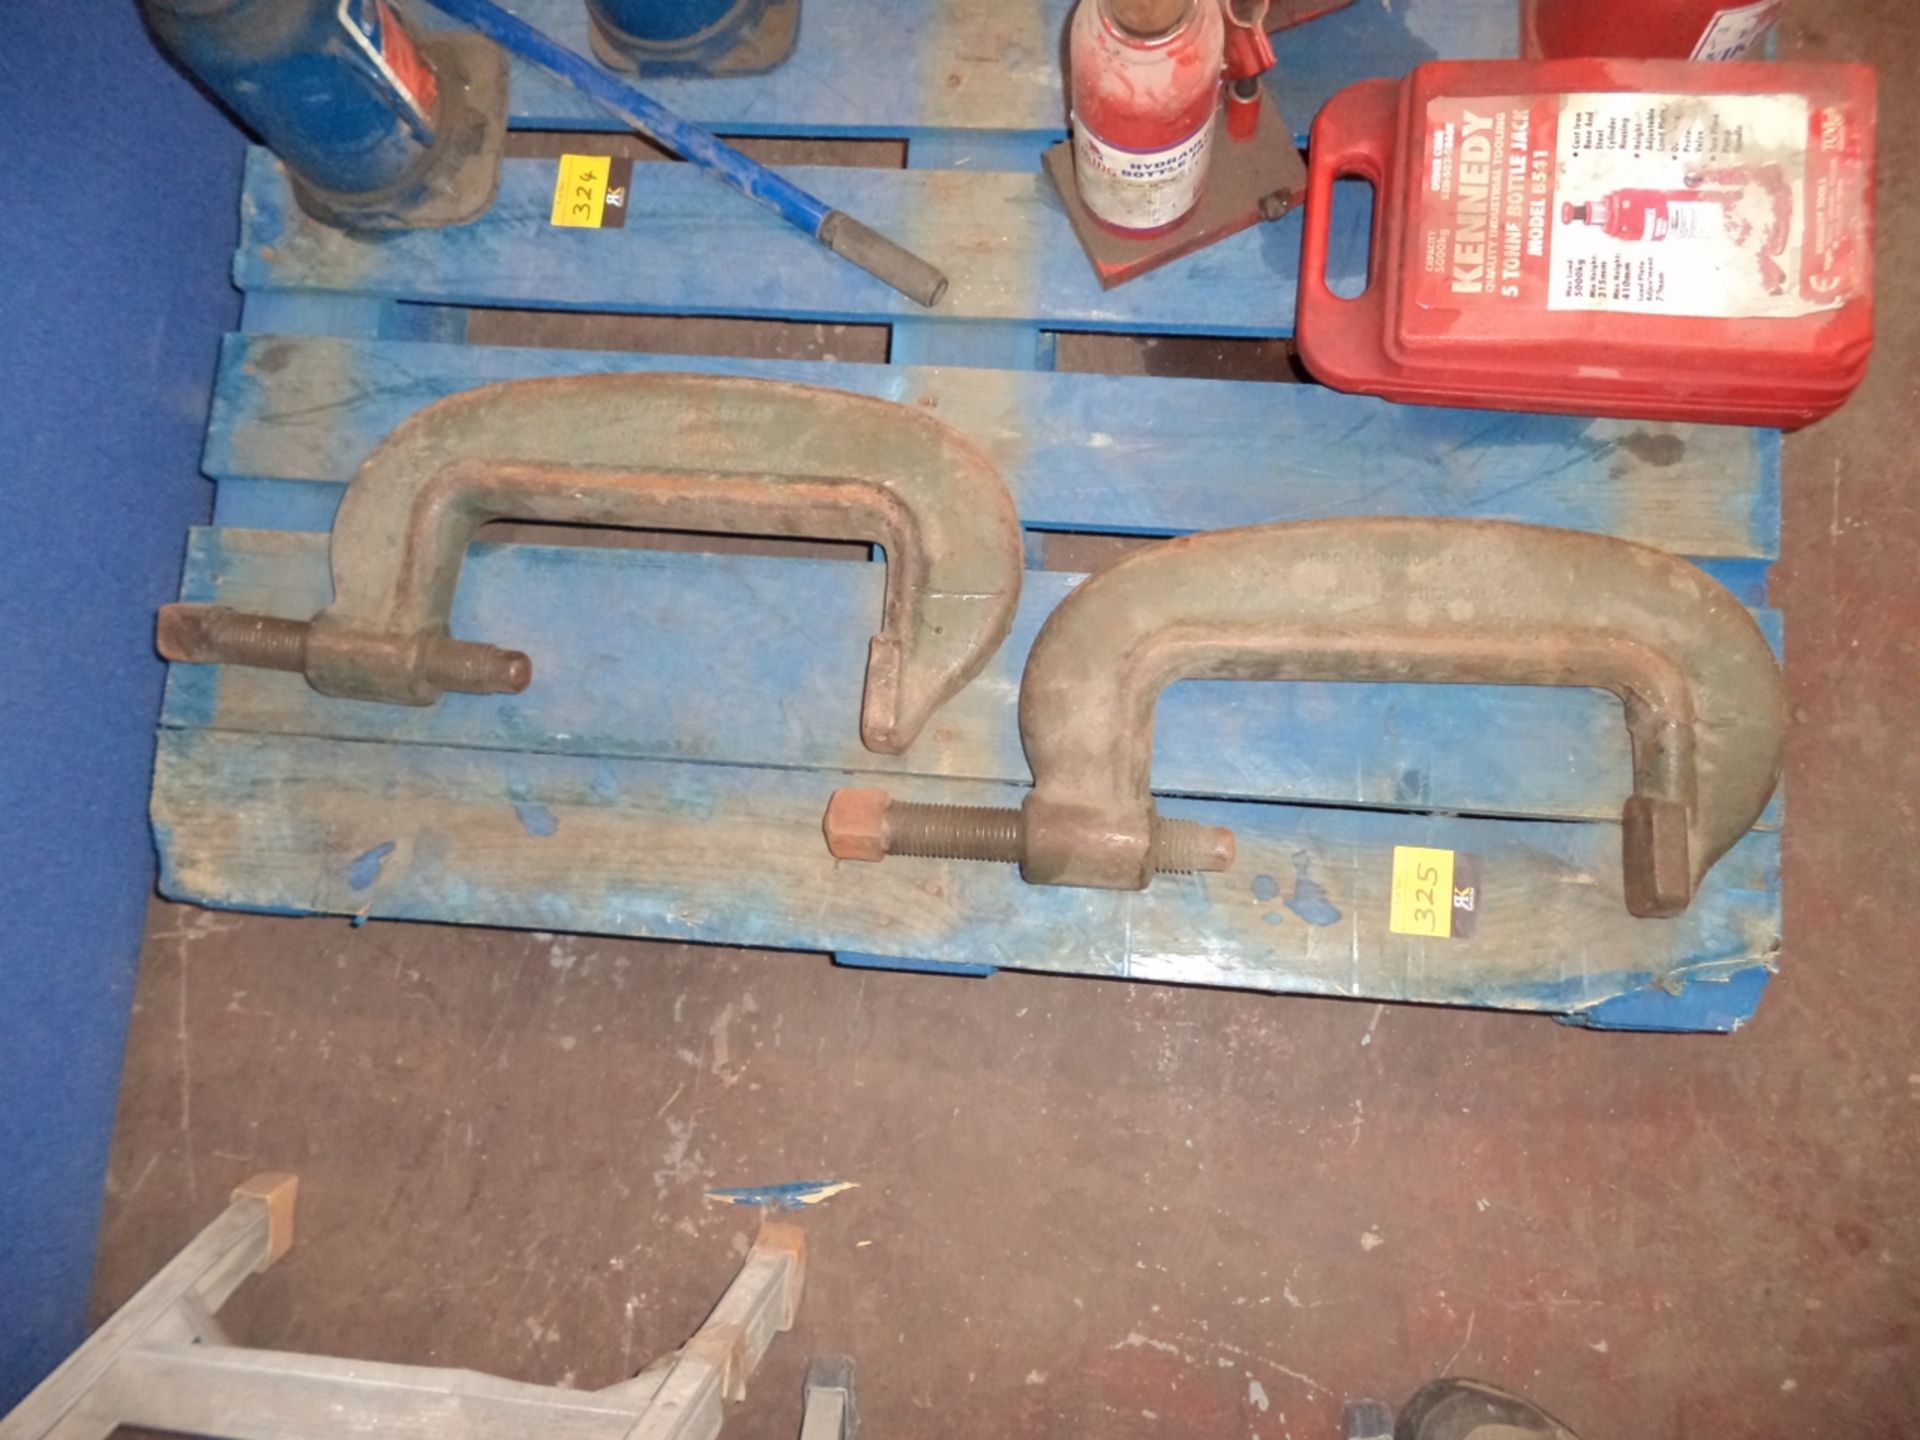 Pair of large heavy-duty clamps - Image 2 of 2